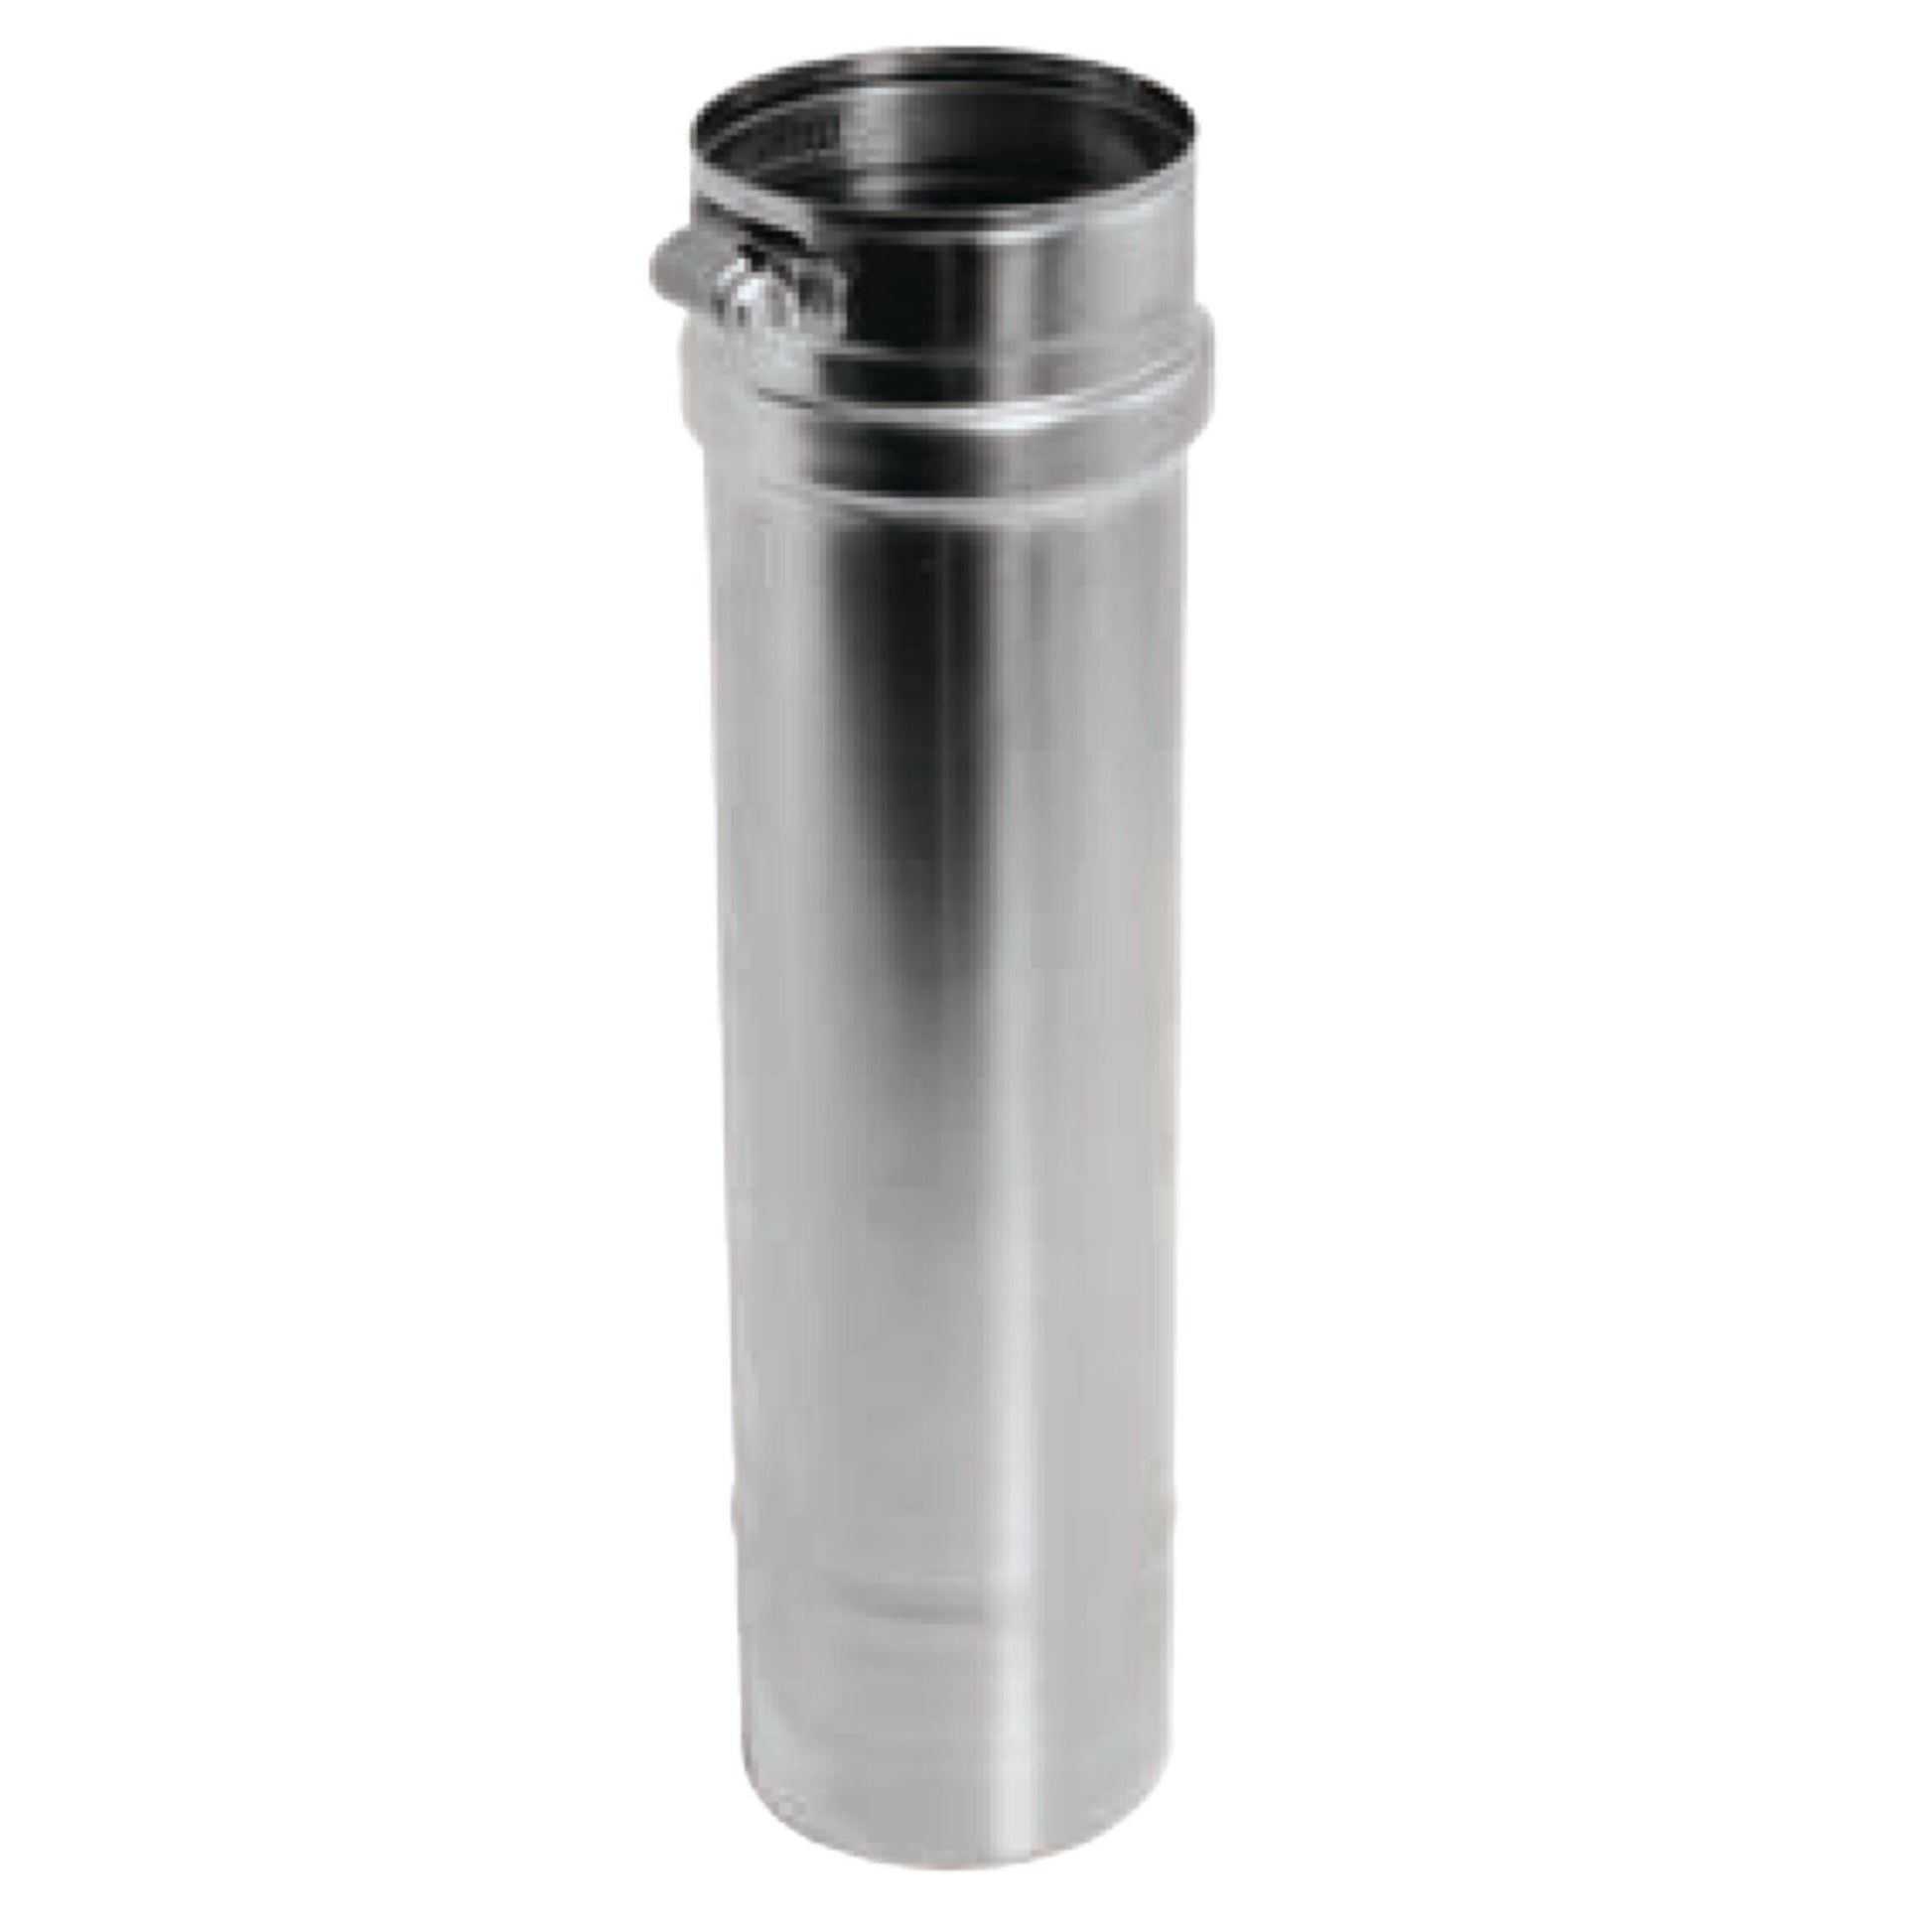 DuraVent FasNSeal 8" x 18" 316L Stainless Steel Vent Length